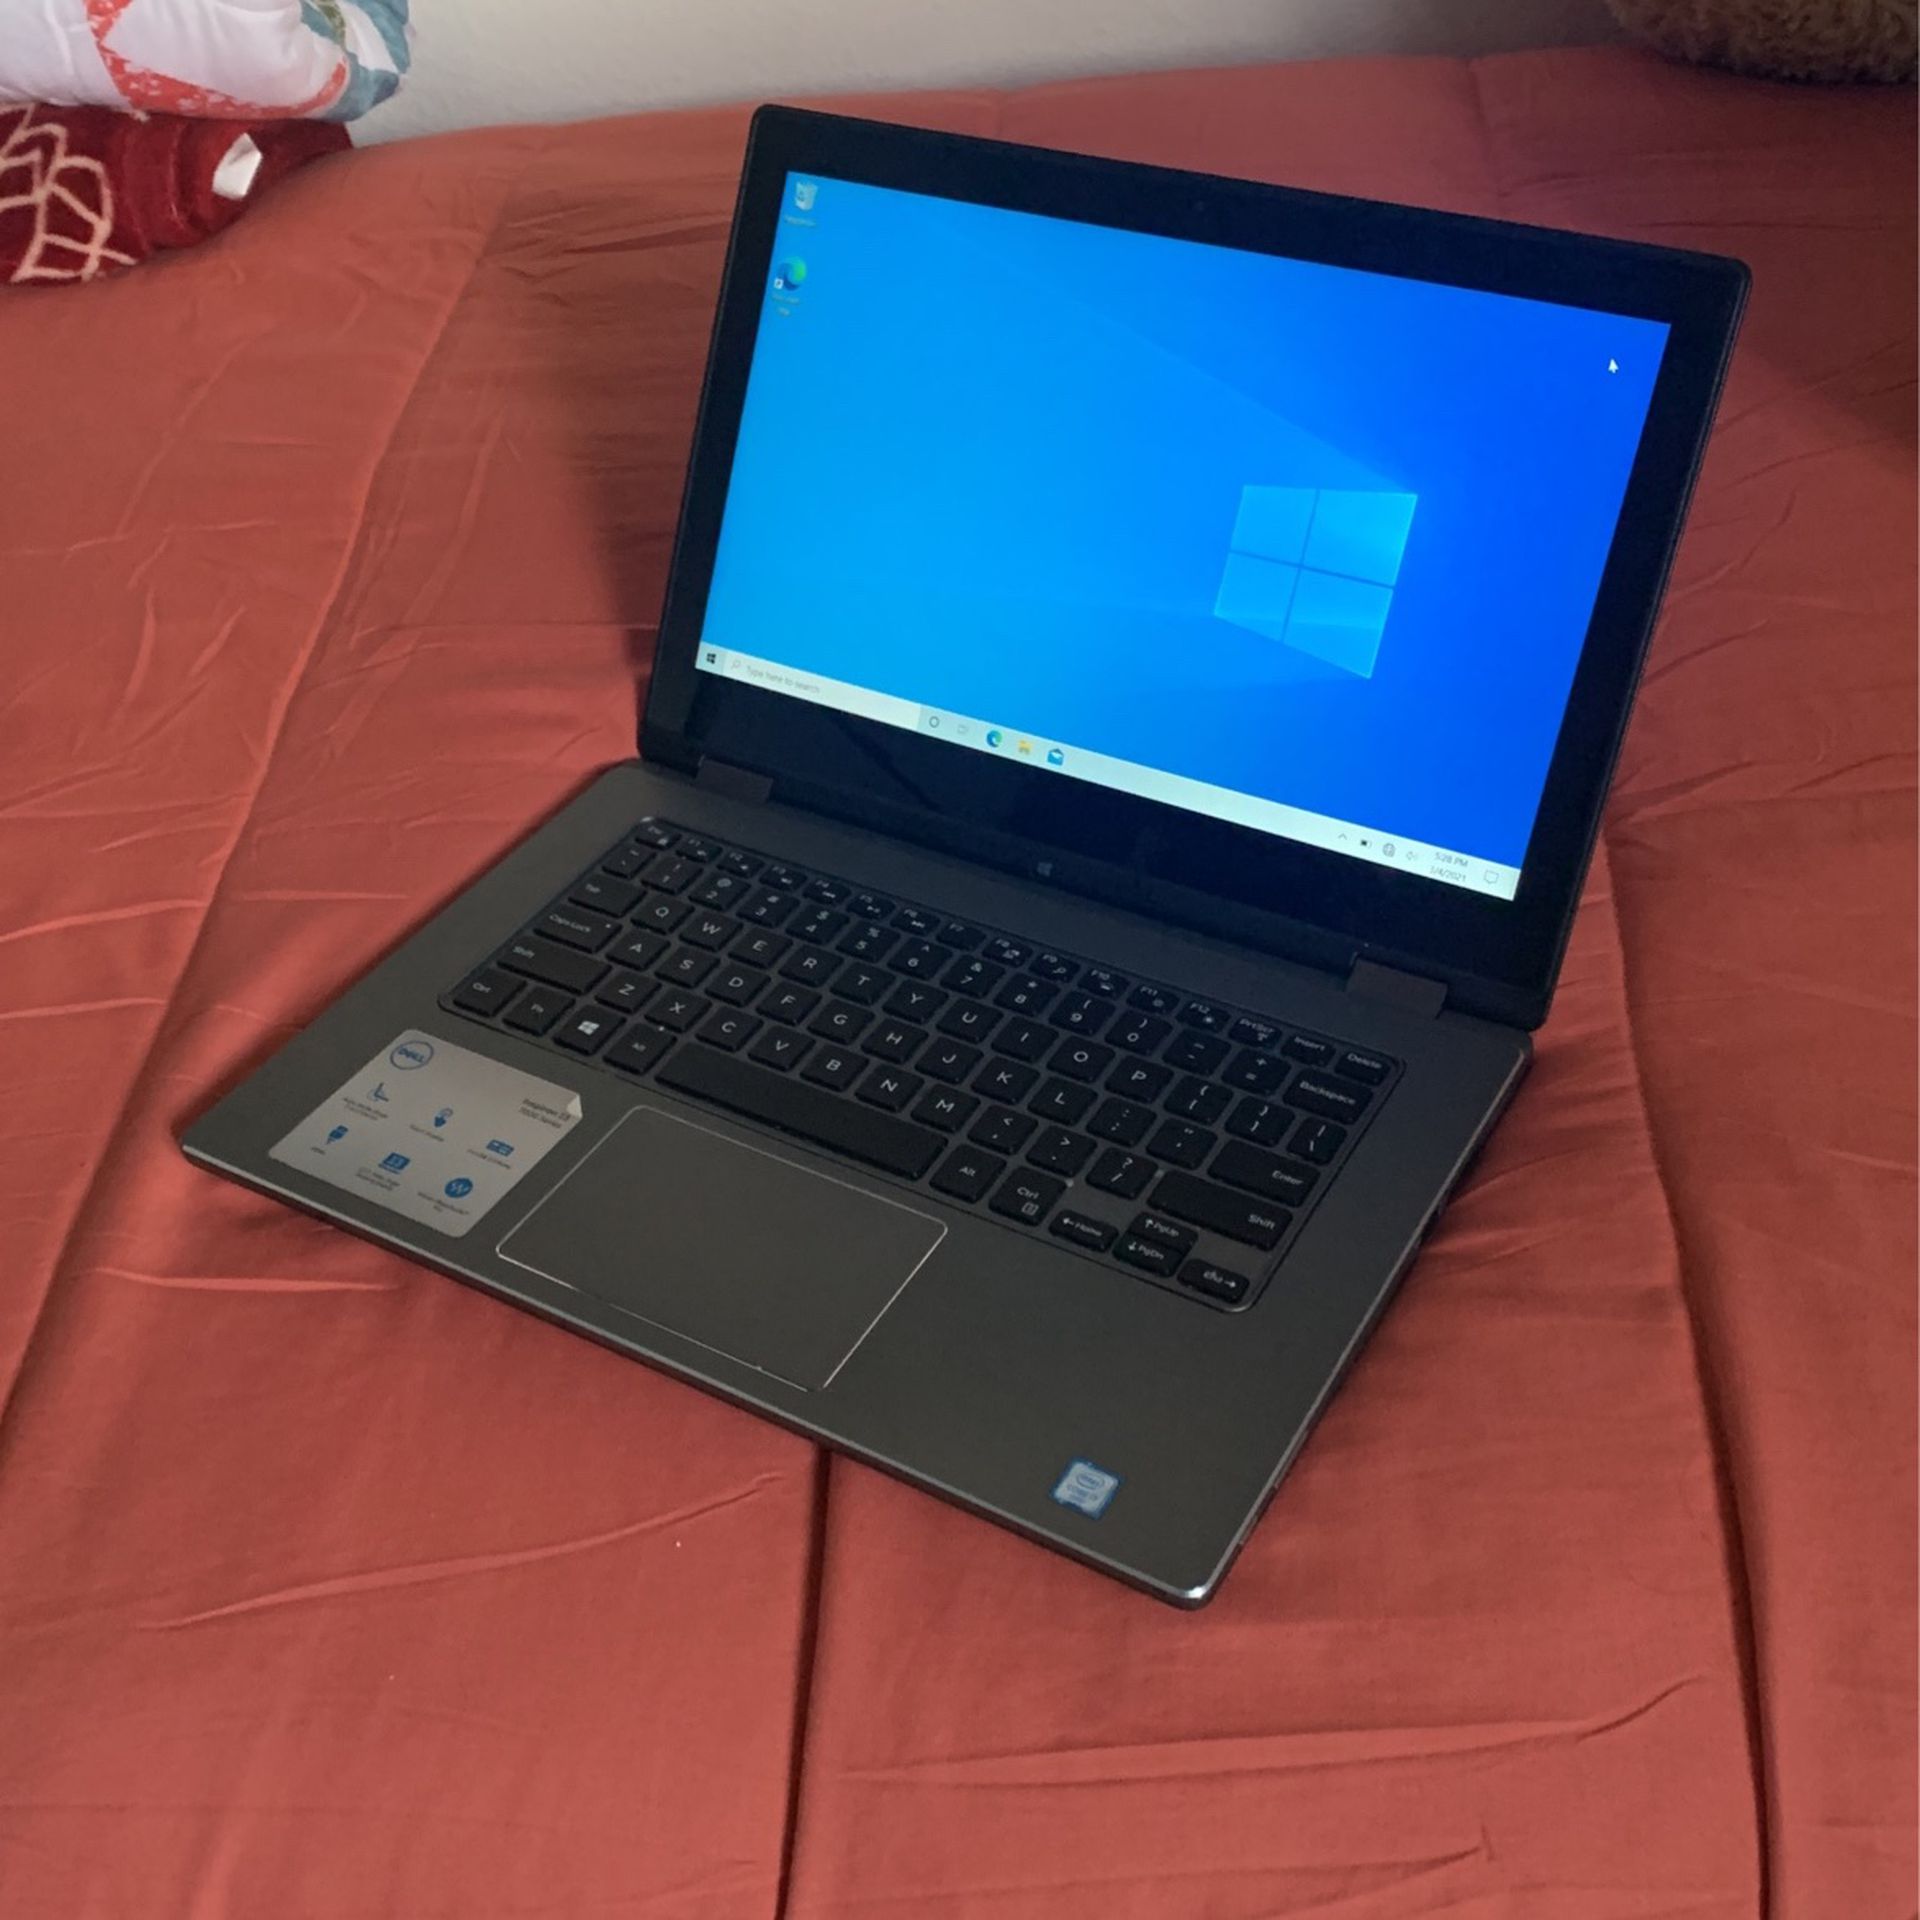 Dell Inspiron 13 7000 Series - Laptop/Tablet